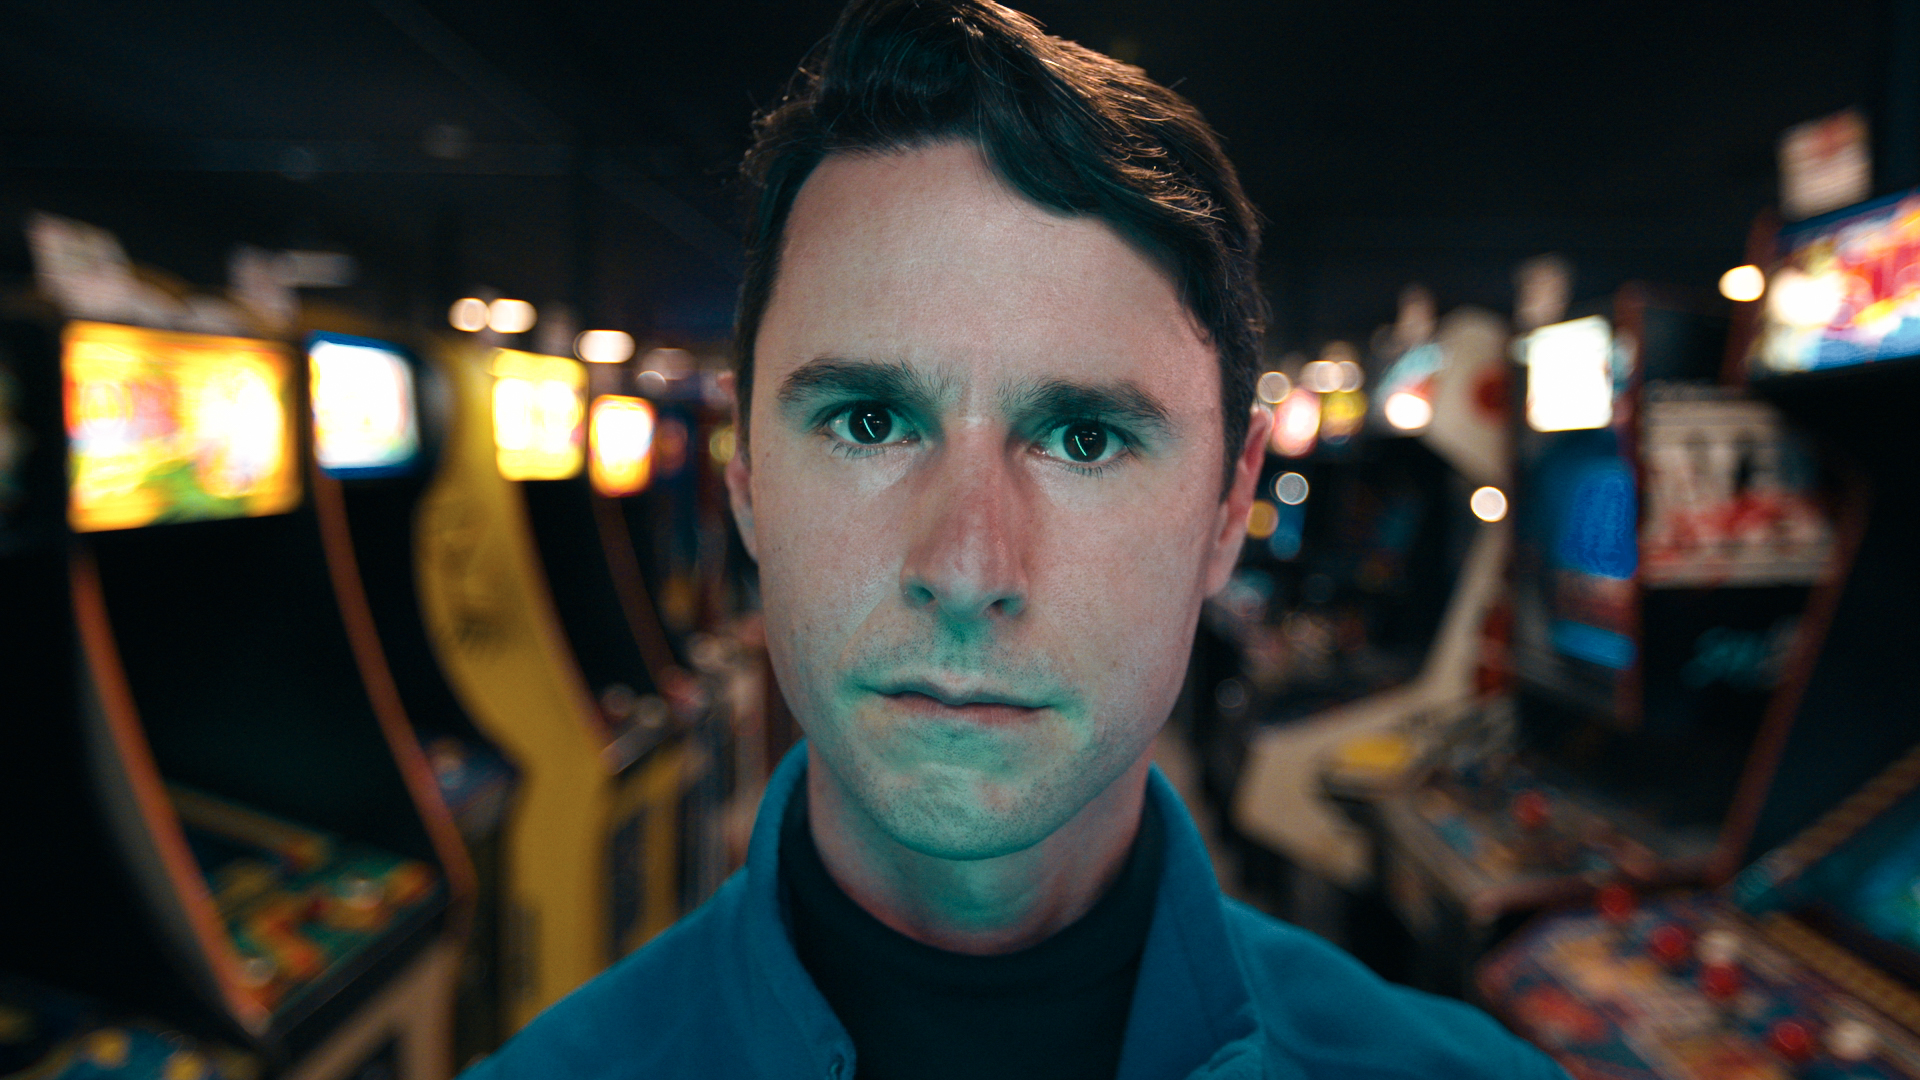 man stares into camera surrounded by arcade games